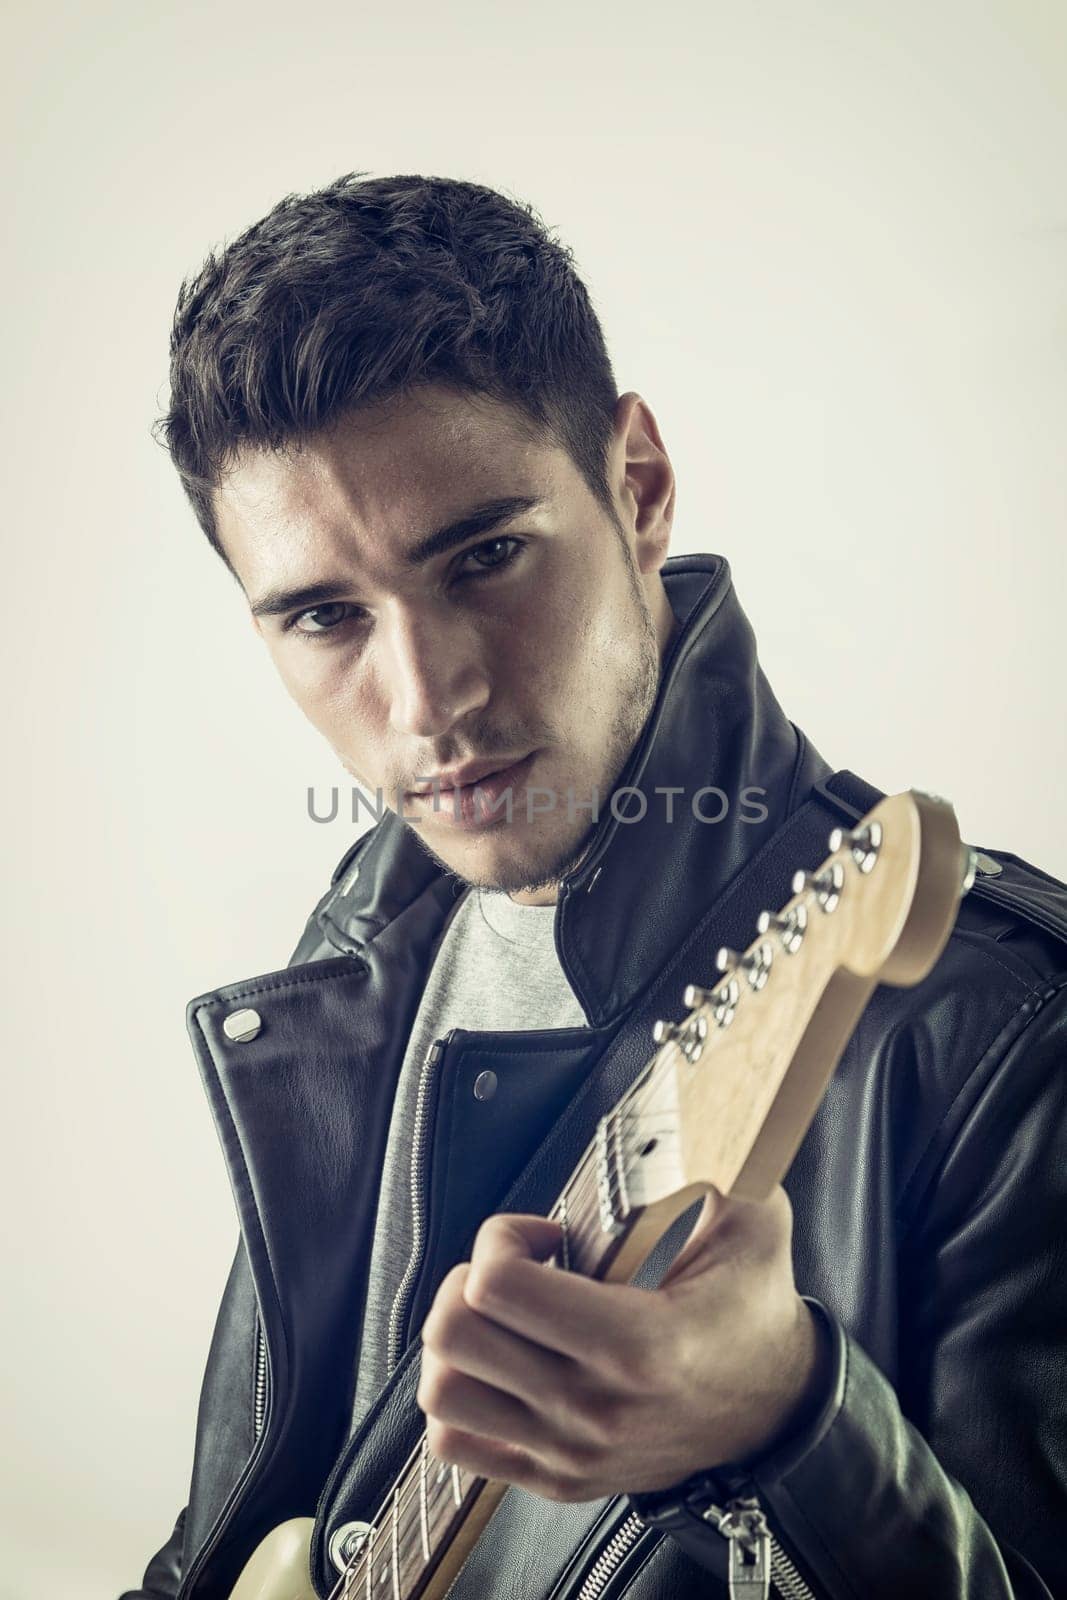 Photo of a musician rocking out in studio with his guitar by artofphoto